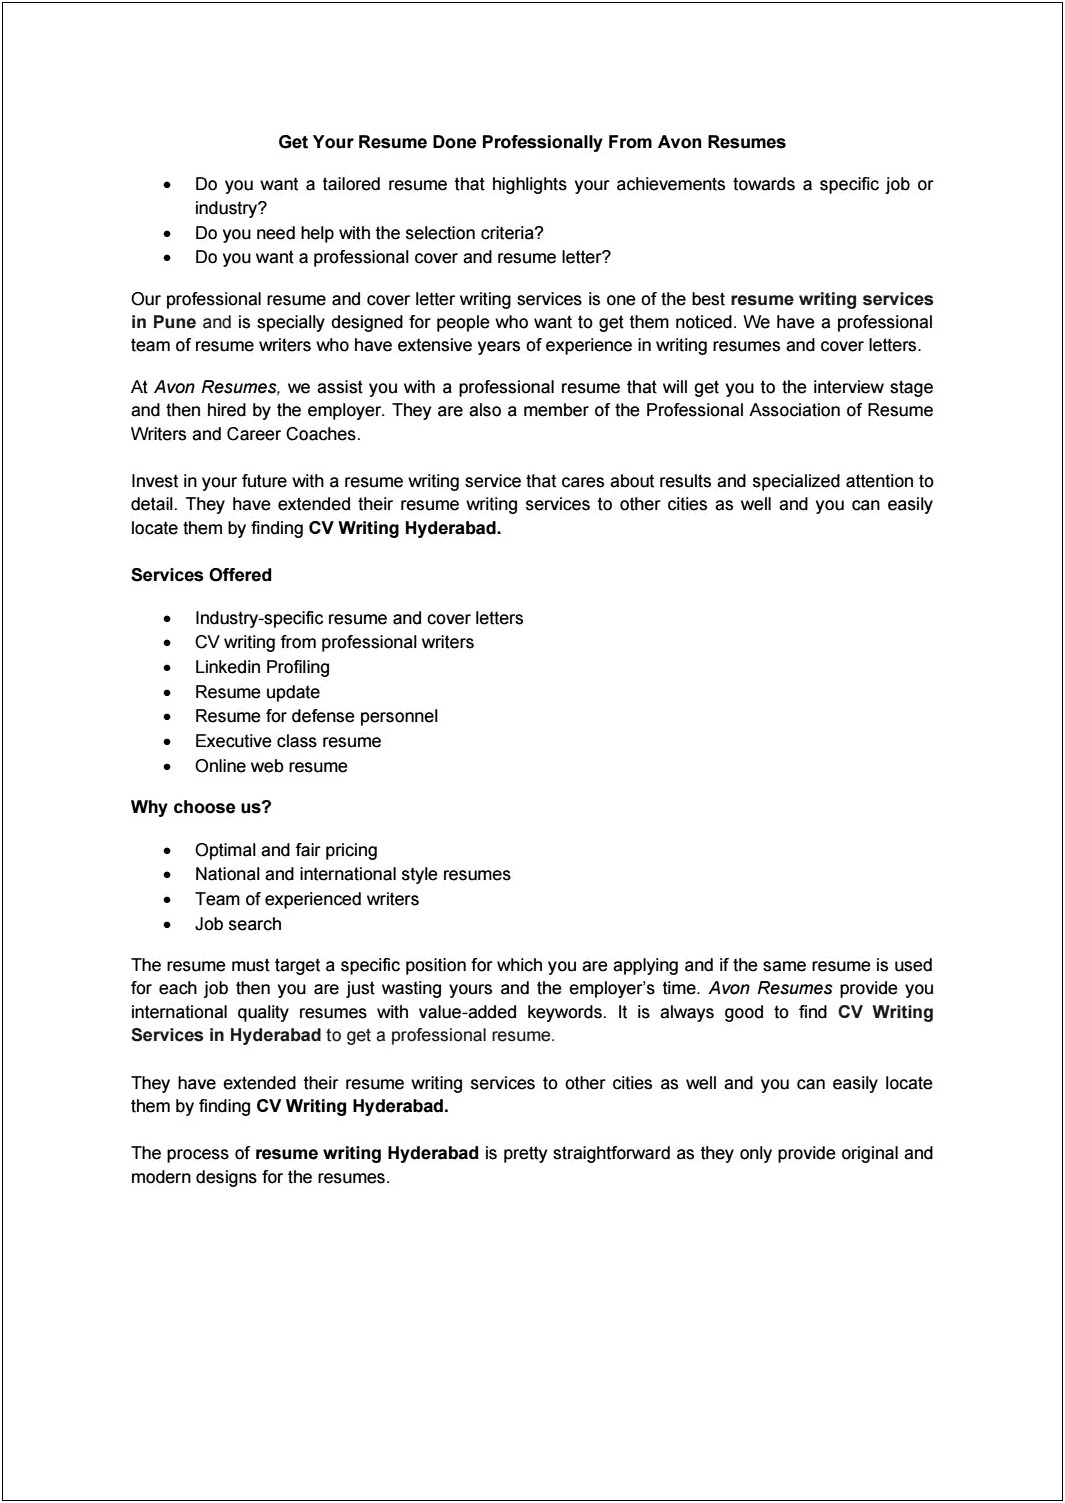 Linkedin Resume And Cover Letter Service